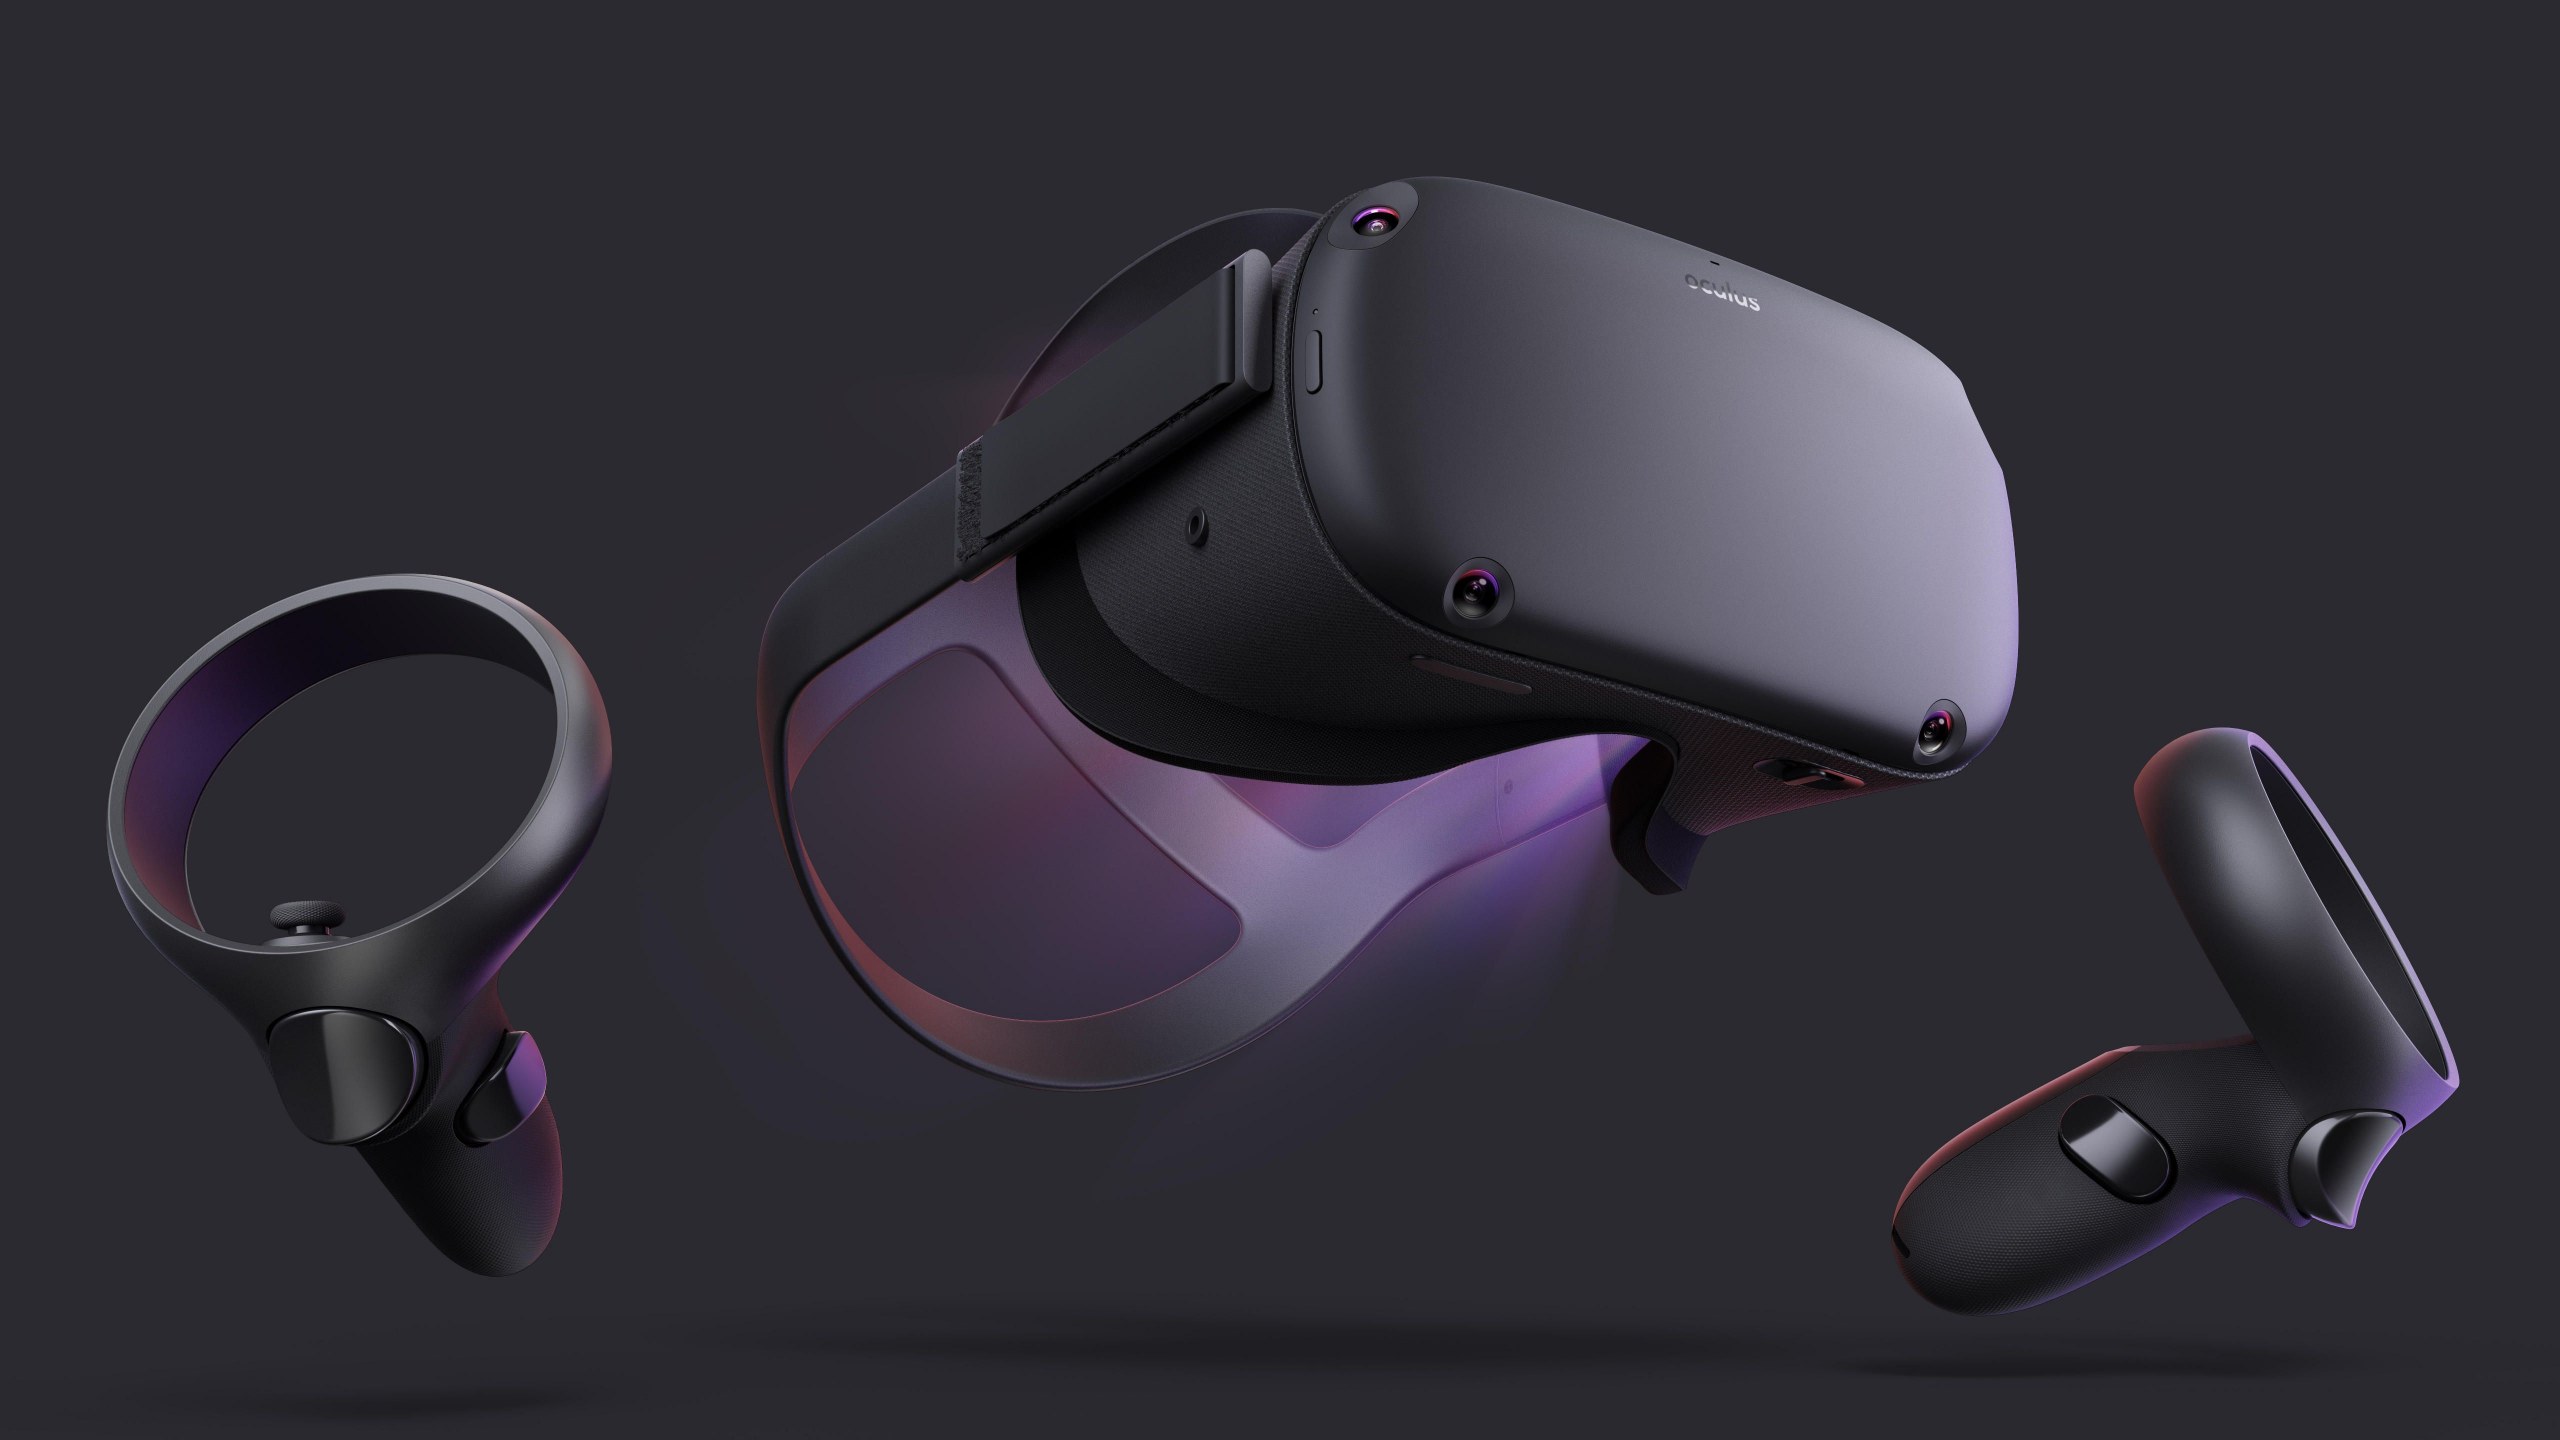 A smaller, lighter Oculus Quest with a better display is reportedly in the works